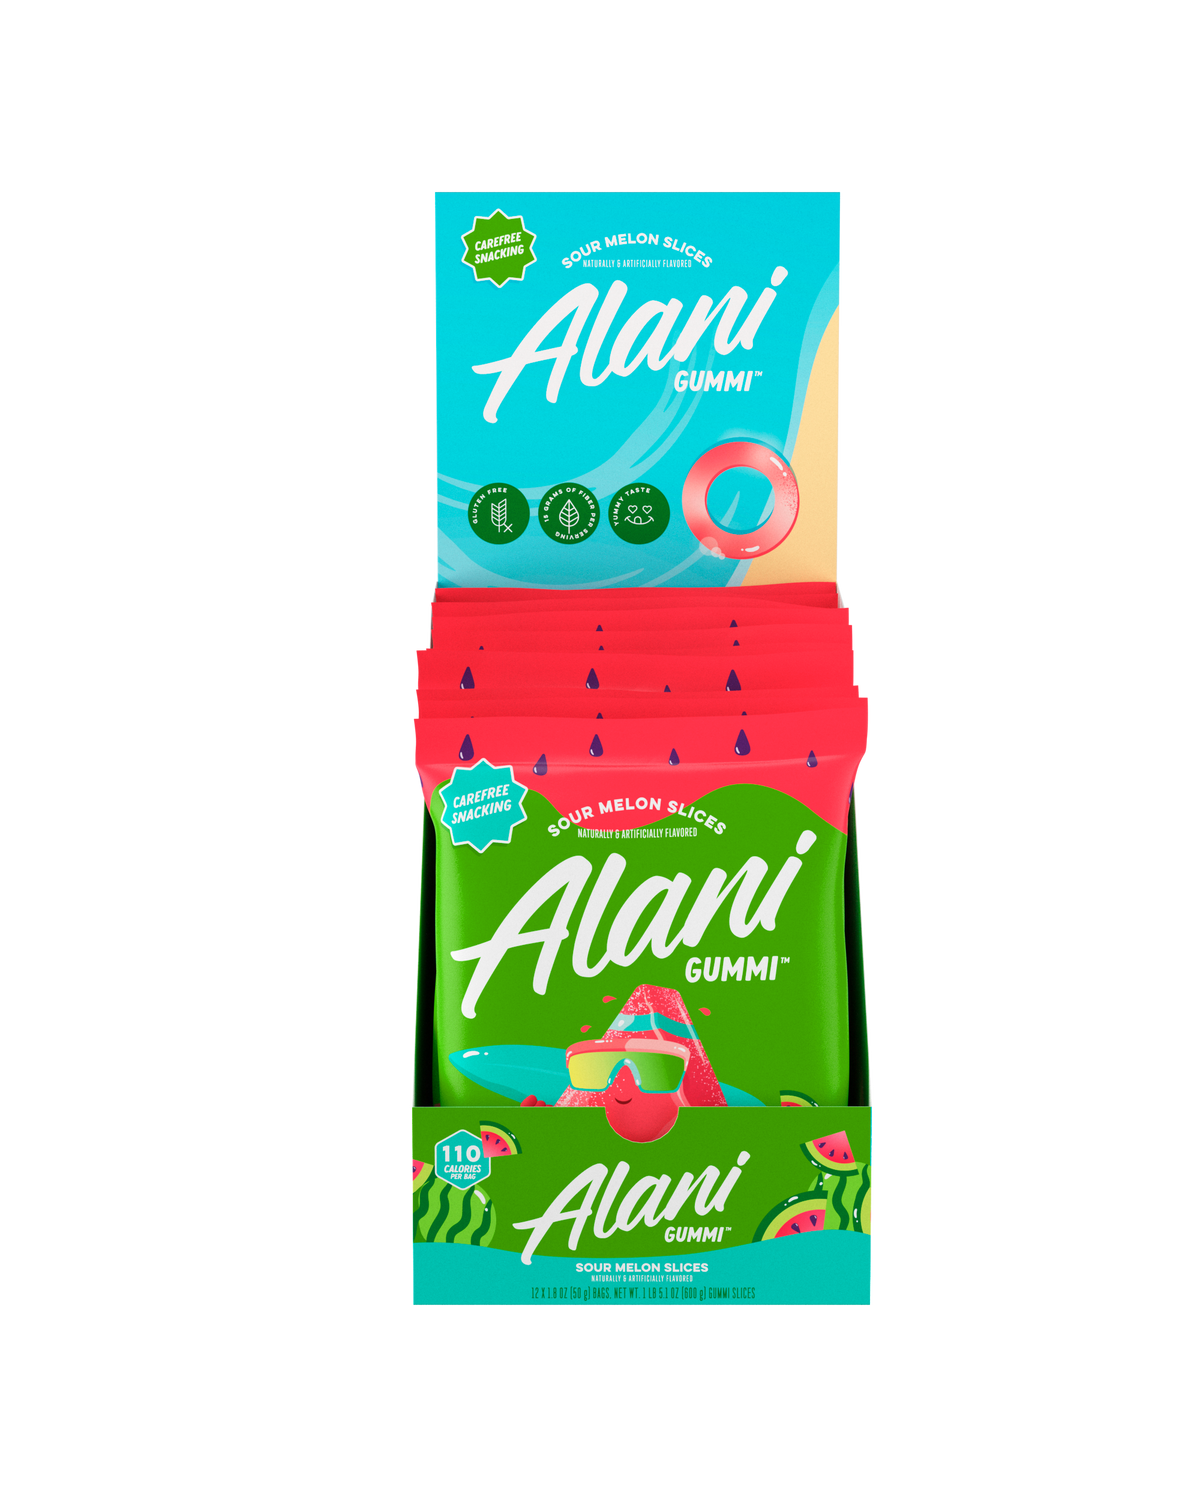 A 12 pack front view of gummi in flavor sour melon slices. 